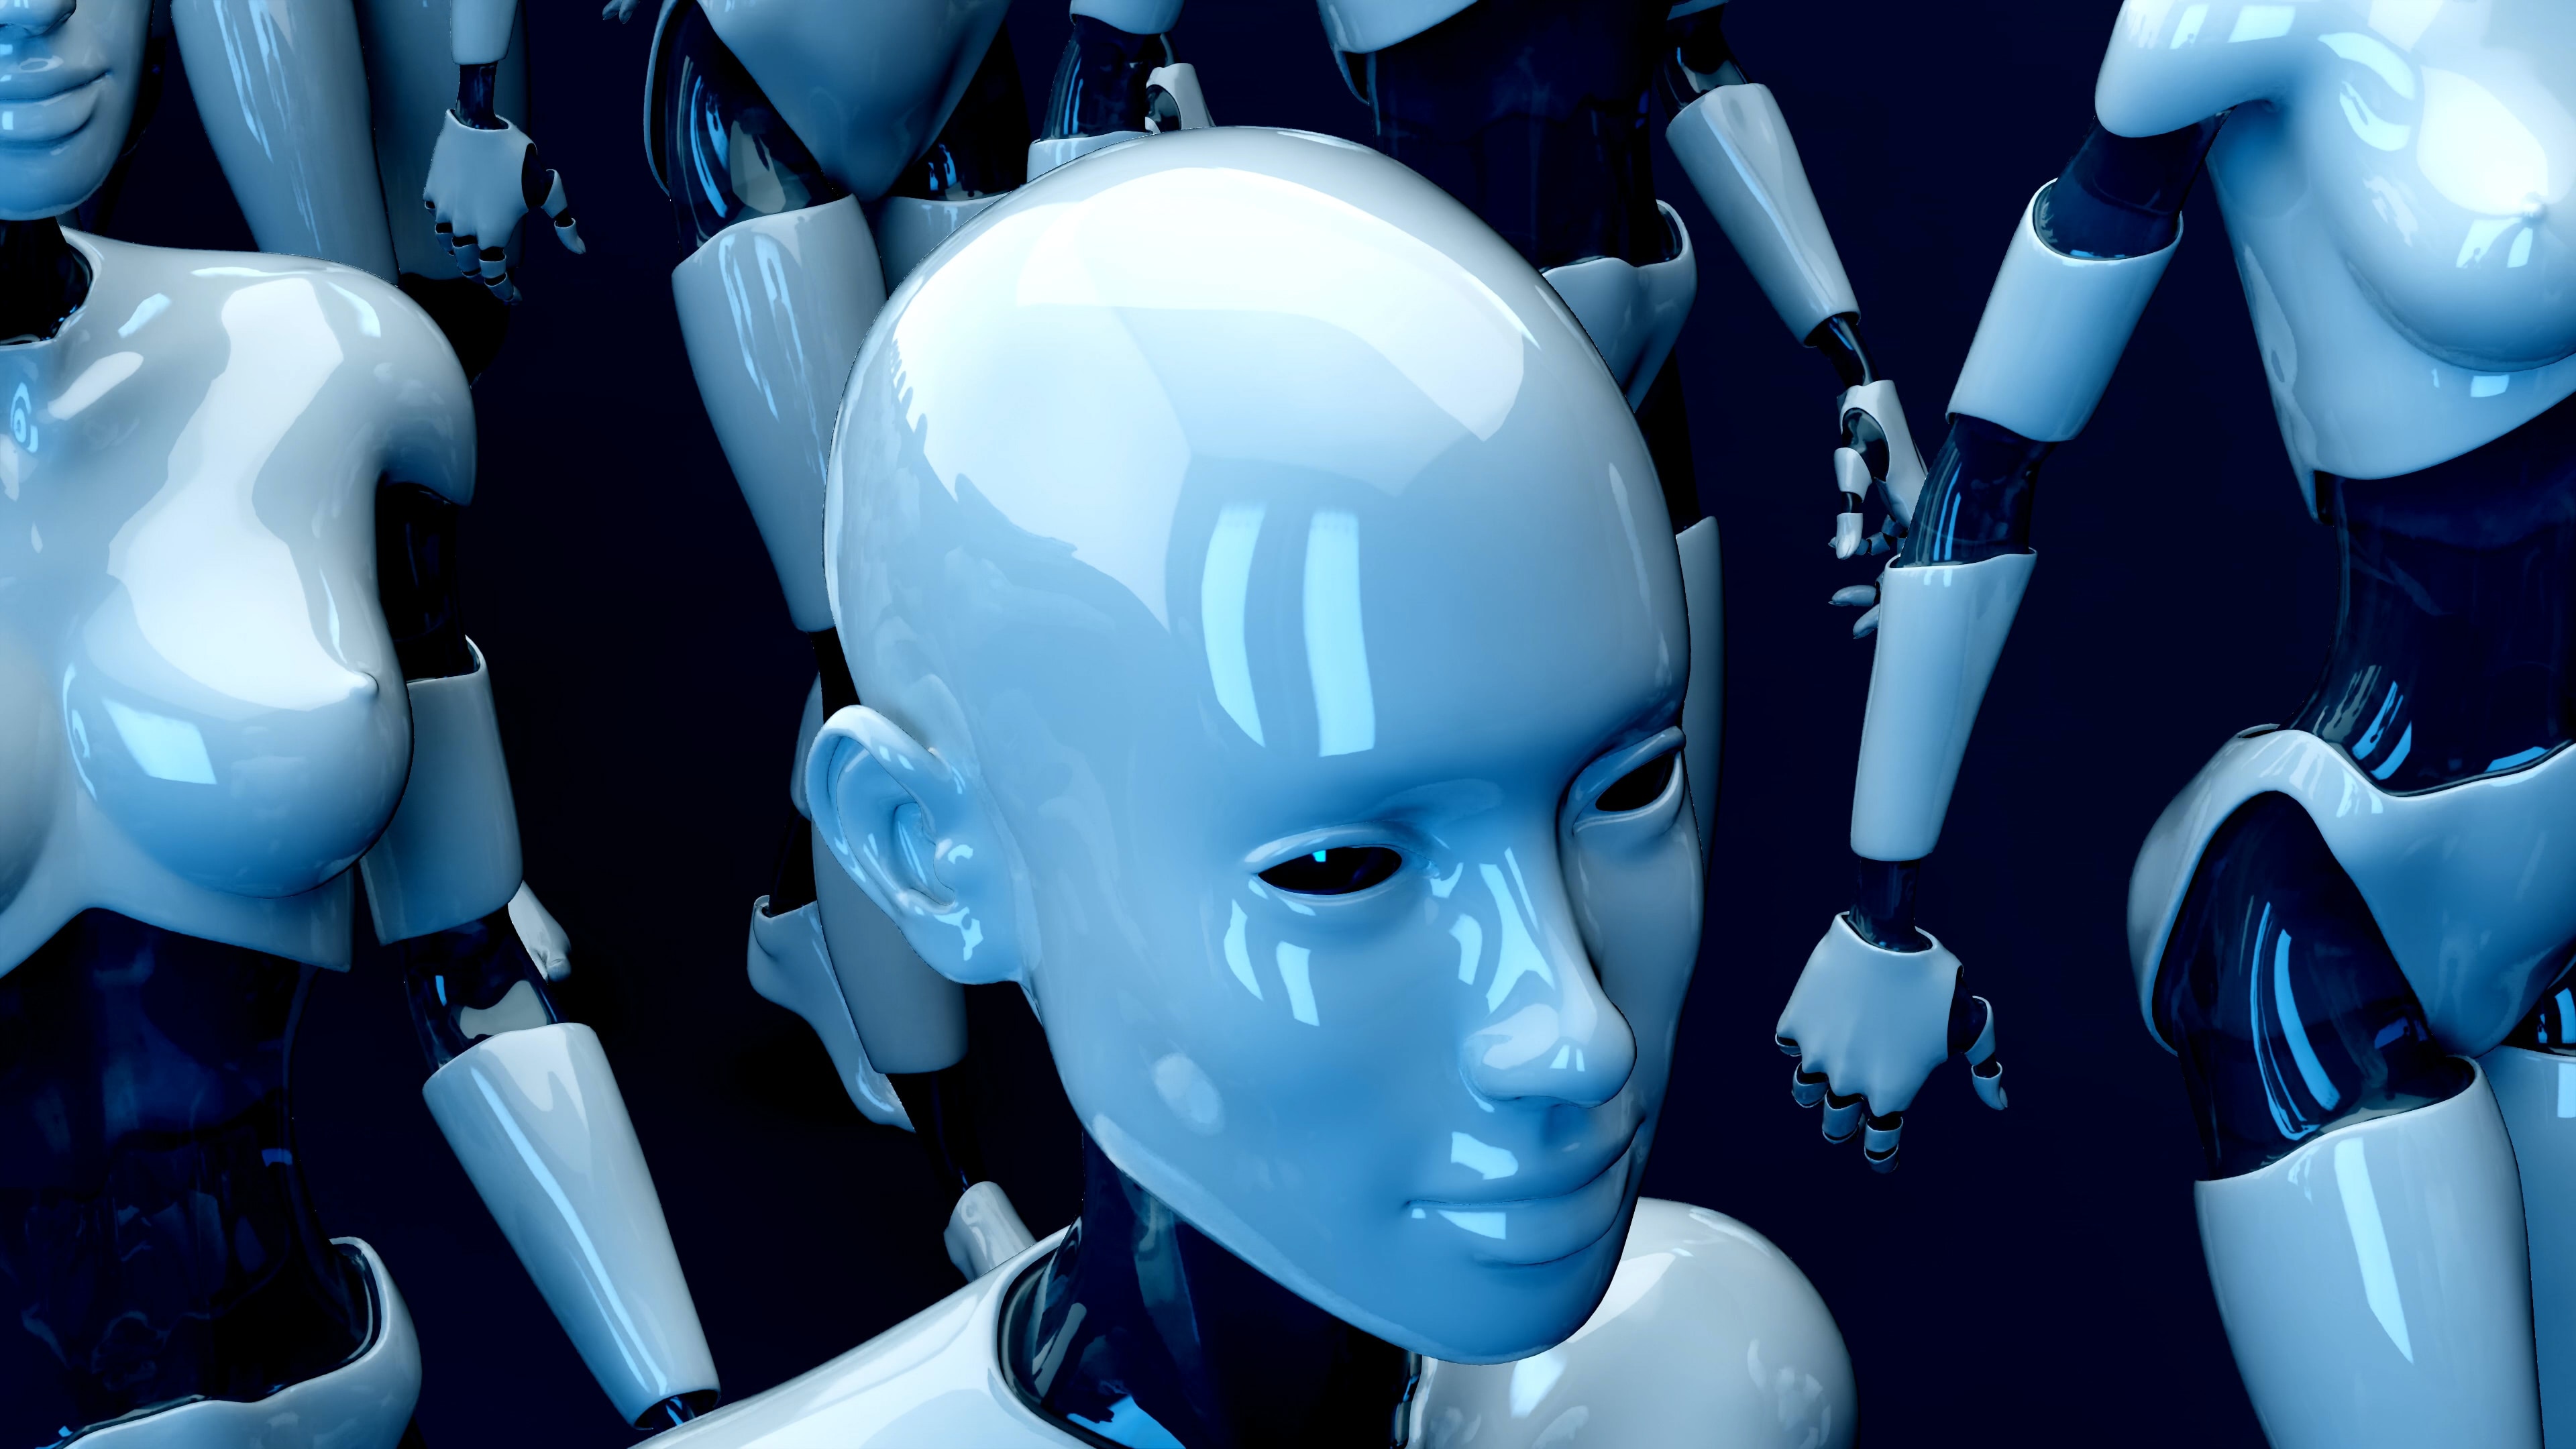 A 3-D rendering of woman-shaped robots.